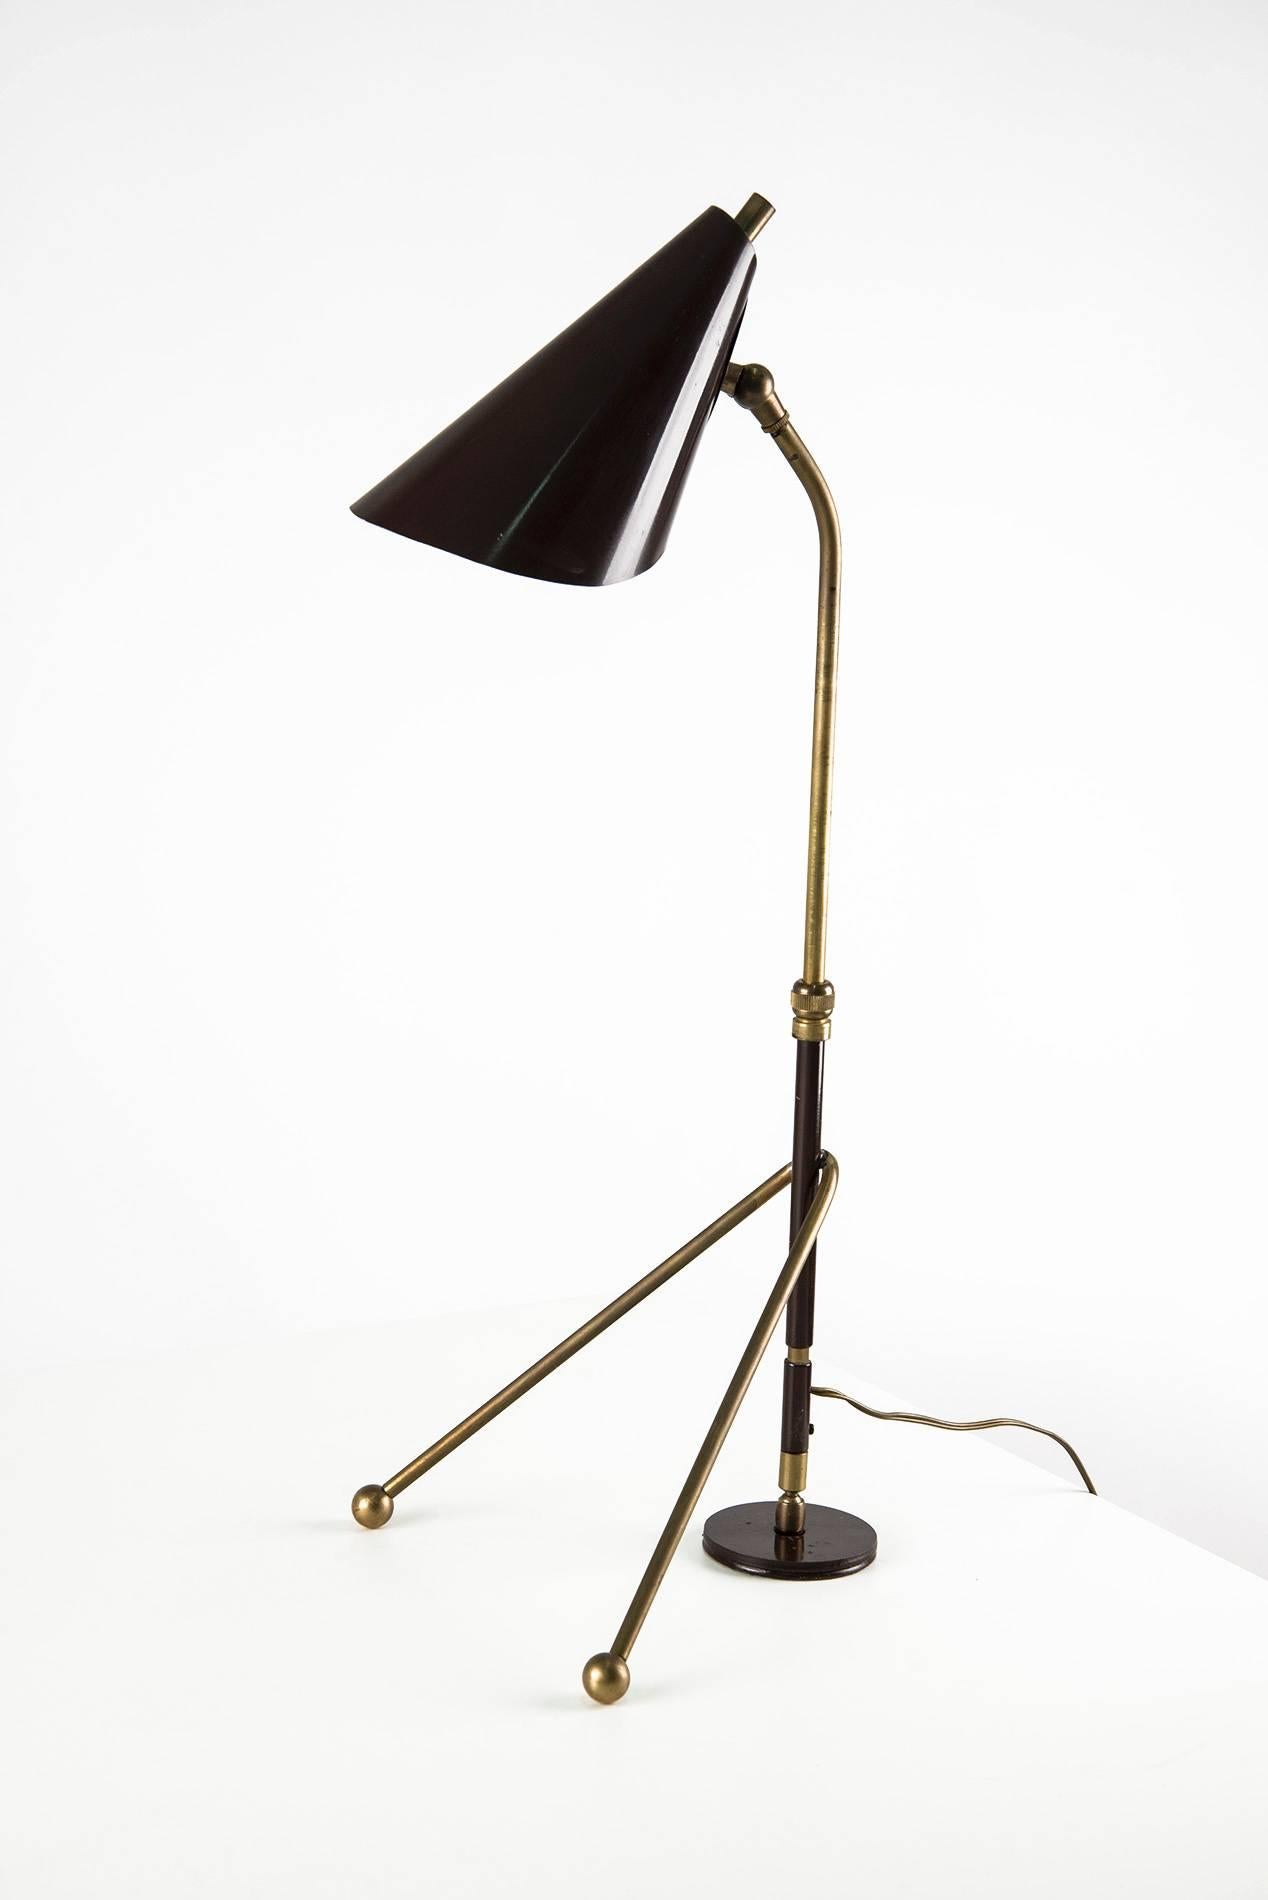 Brilliant and rare table lamp manufactured in Italy in the 1950s. This lamp can be easily adjusted and tilted thanks to its sliding metal tube and the joints located on the base and on the shade. Black lacquered metal base and shade, brass structure